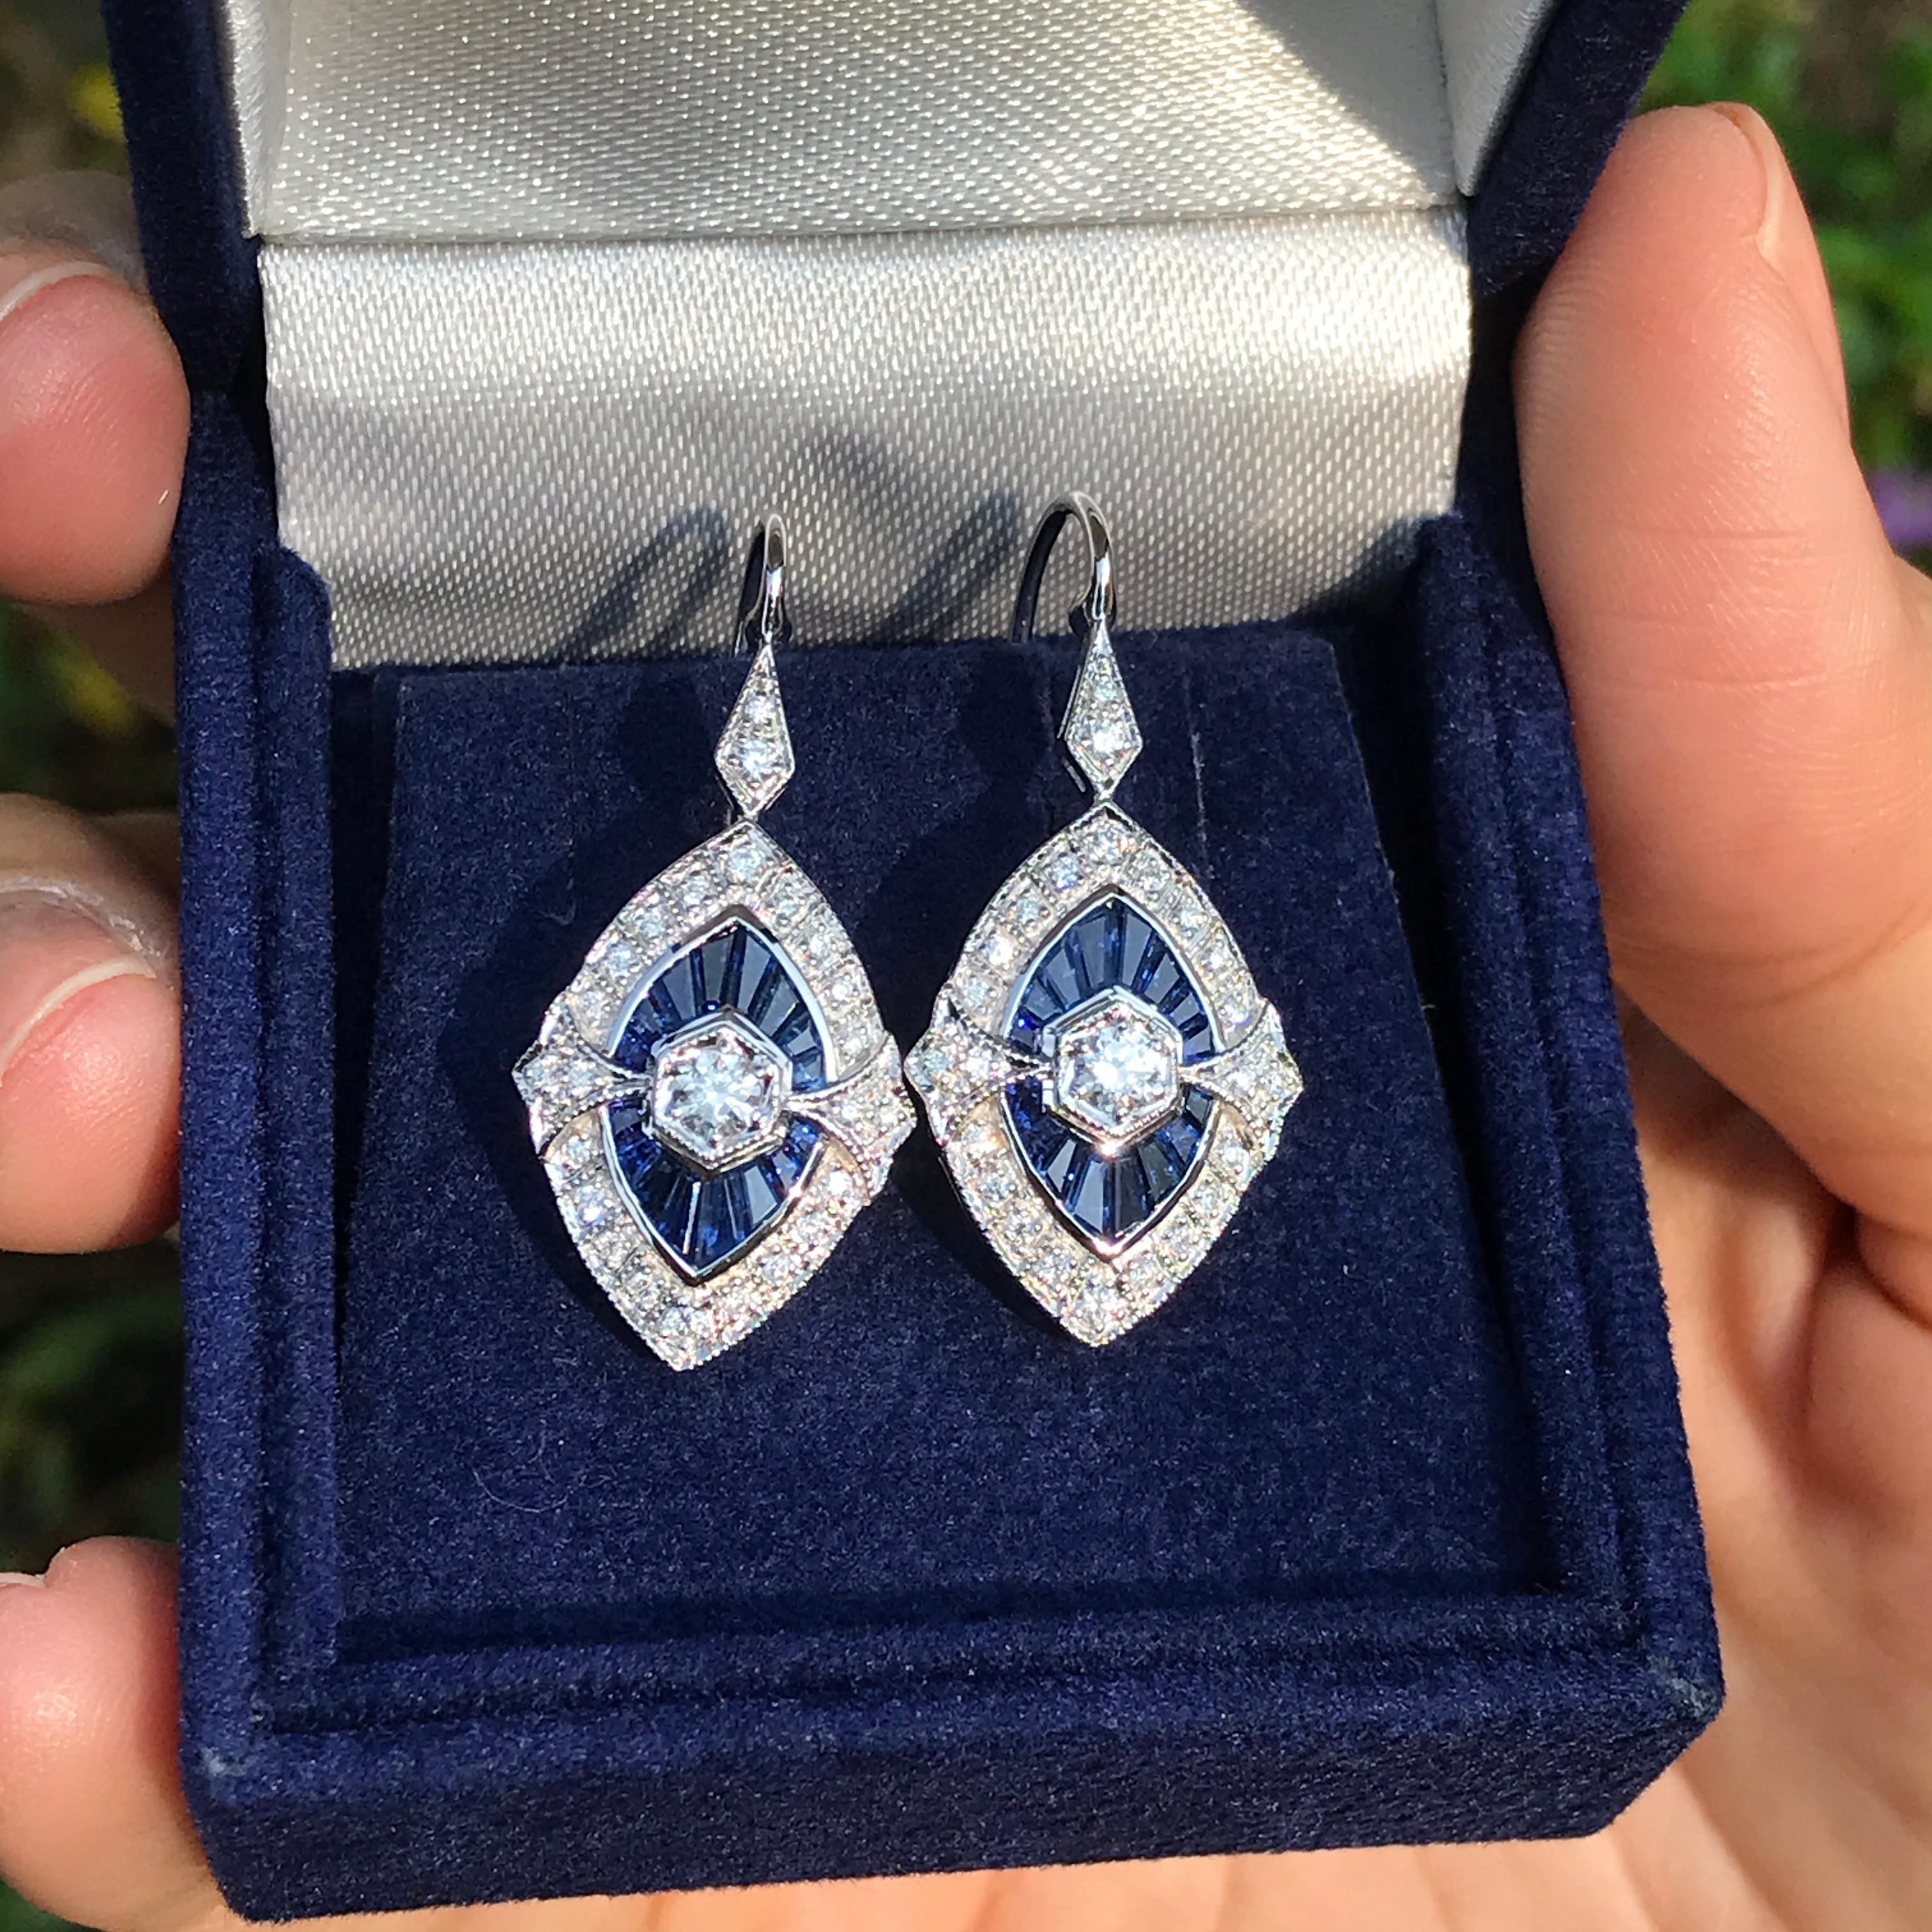 She will adore the Art Deco style brilliant sparkle of these romantic diamond and natural sapphire drop earrings. Created in 18k white gold with millgrain setting, each light-catching dangle features a marquise-shape composite of round diamonds and